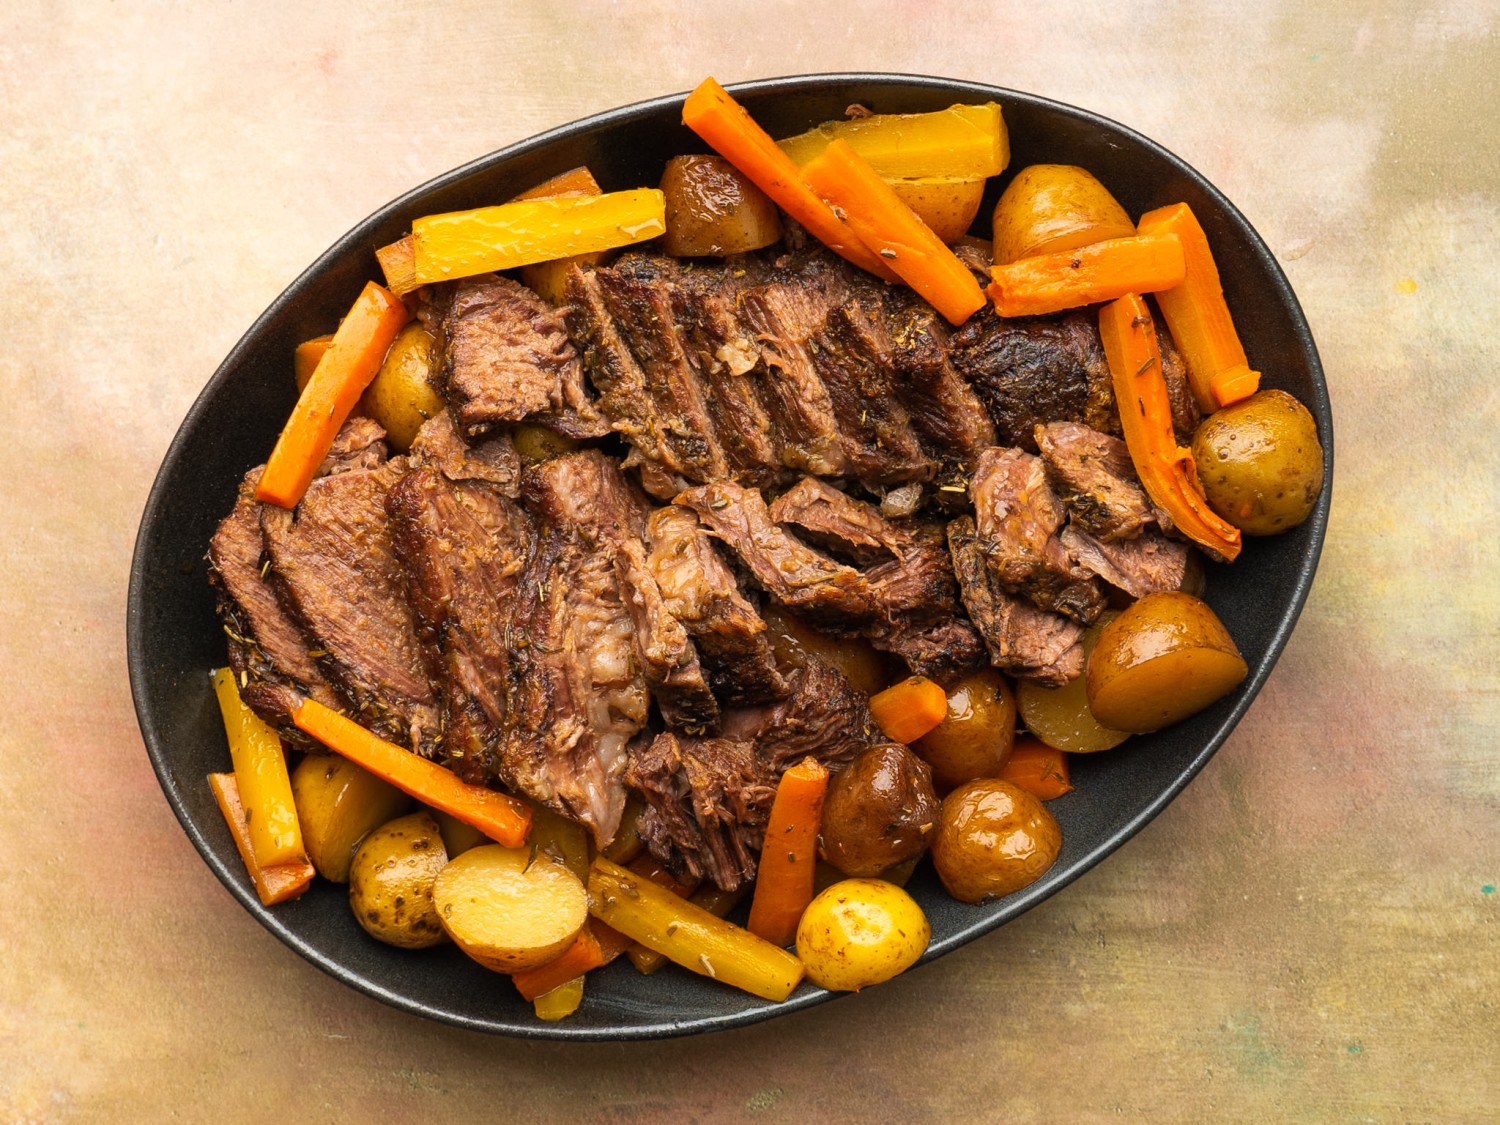 Sliced tender chuck roast on a serving tray with carrots and potatoes